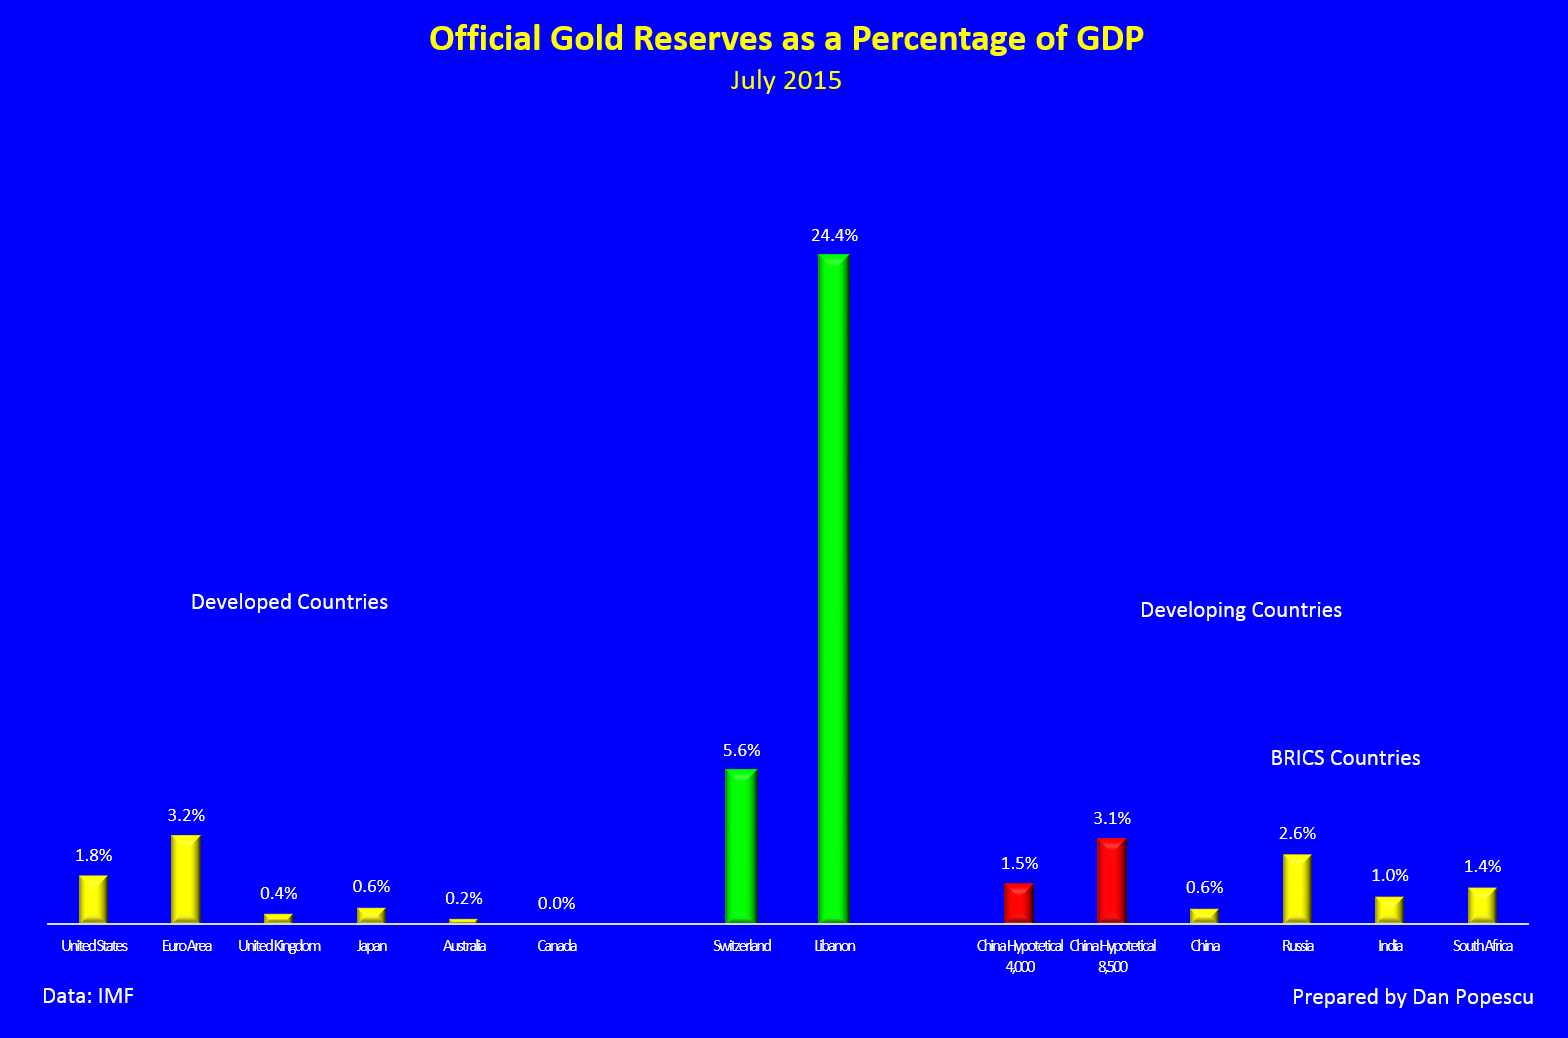 Official gold reserves as a percentage of GDP